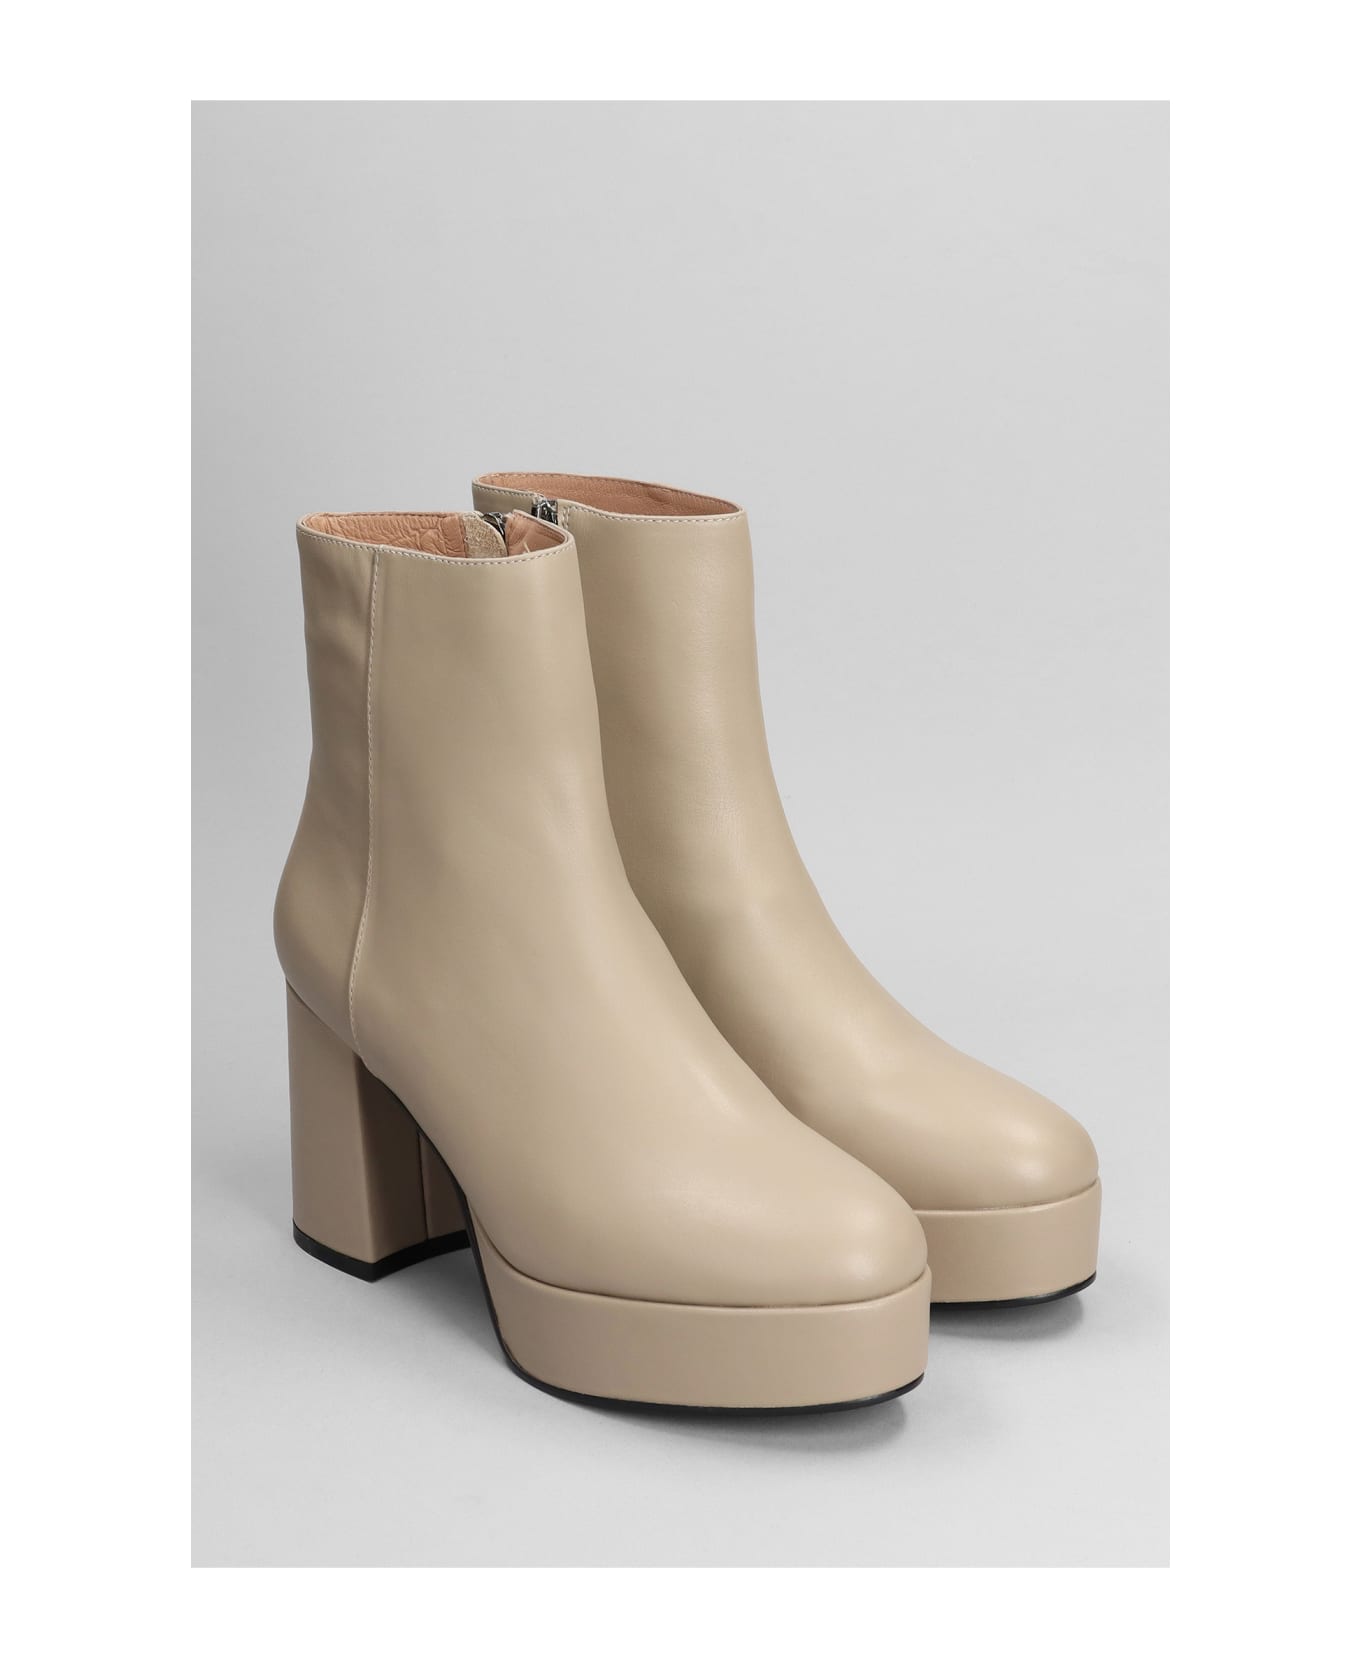 Bibi Lou High Heels Ankle Boots In Taupe Running - taupe